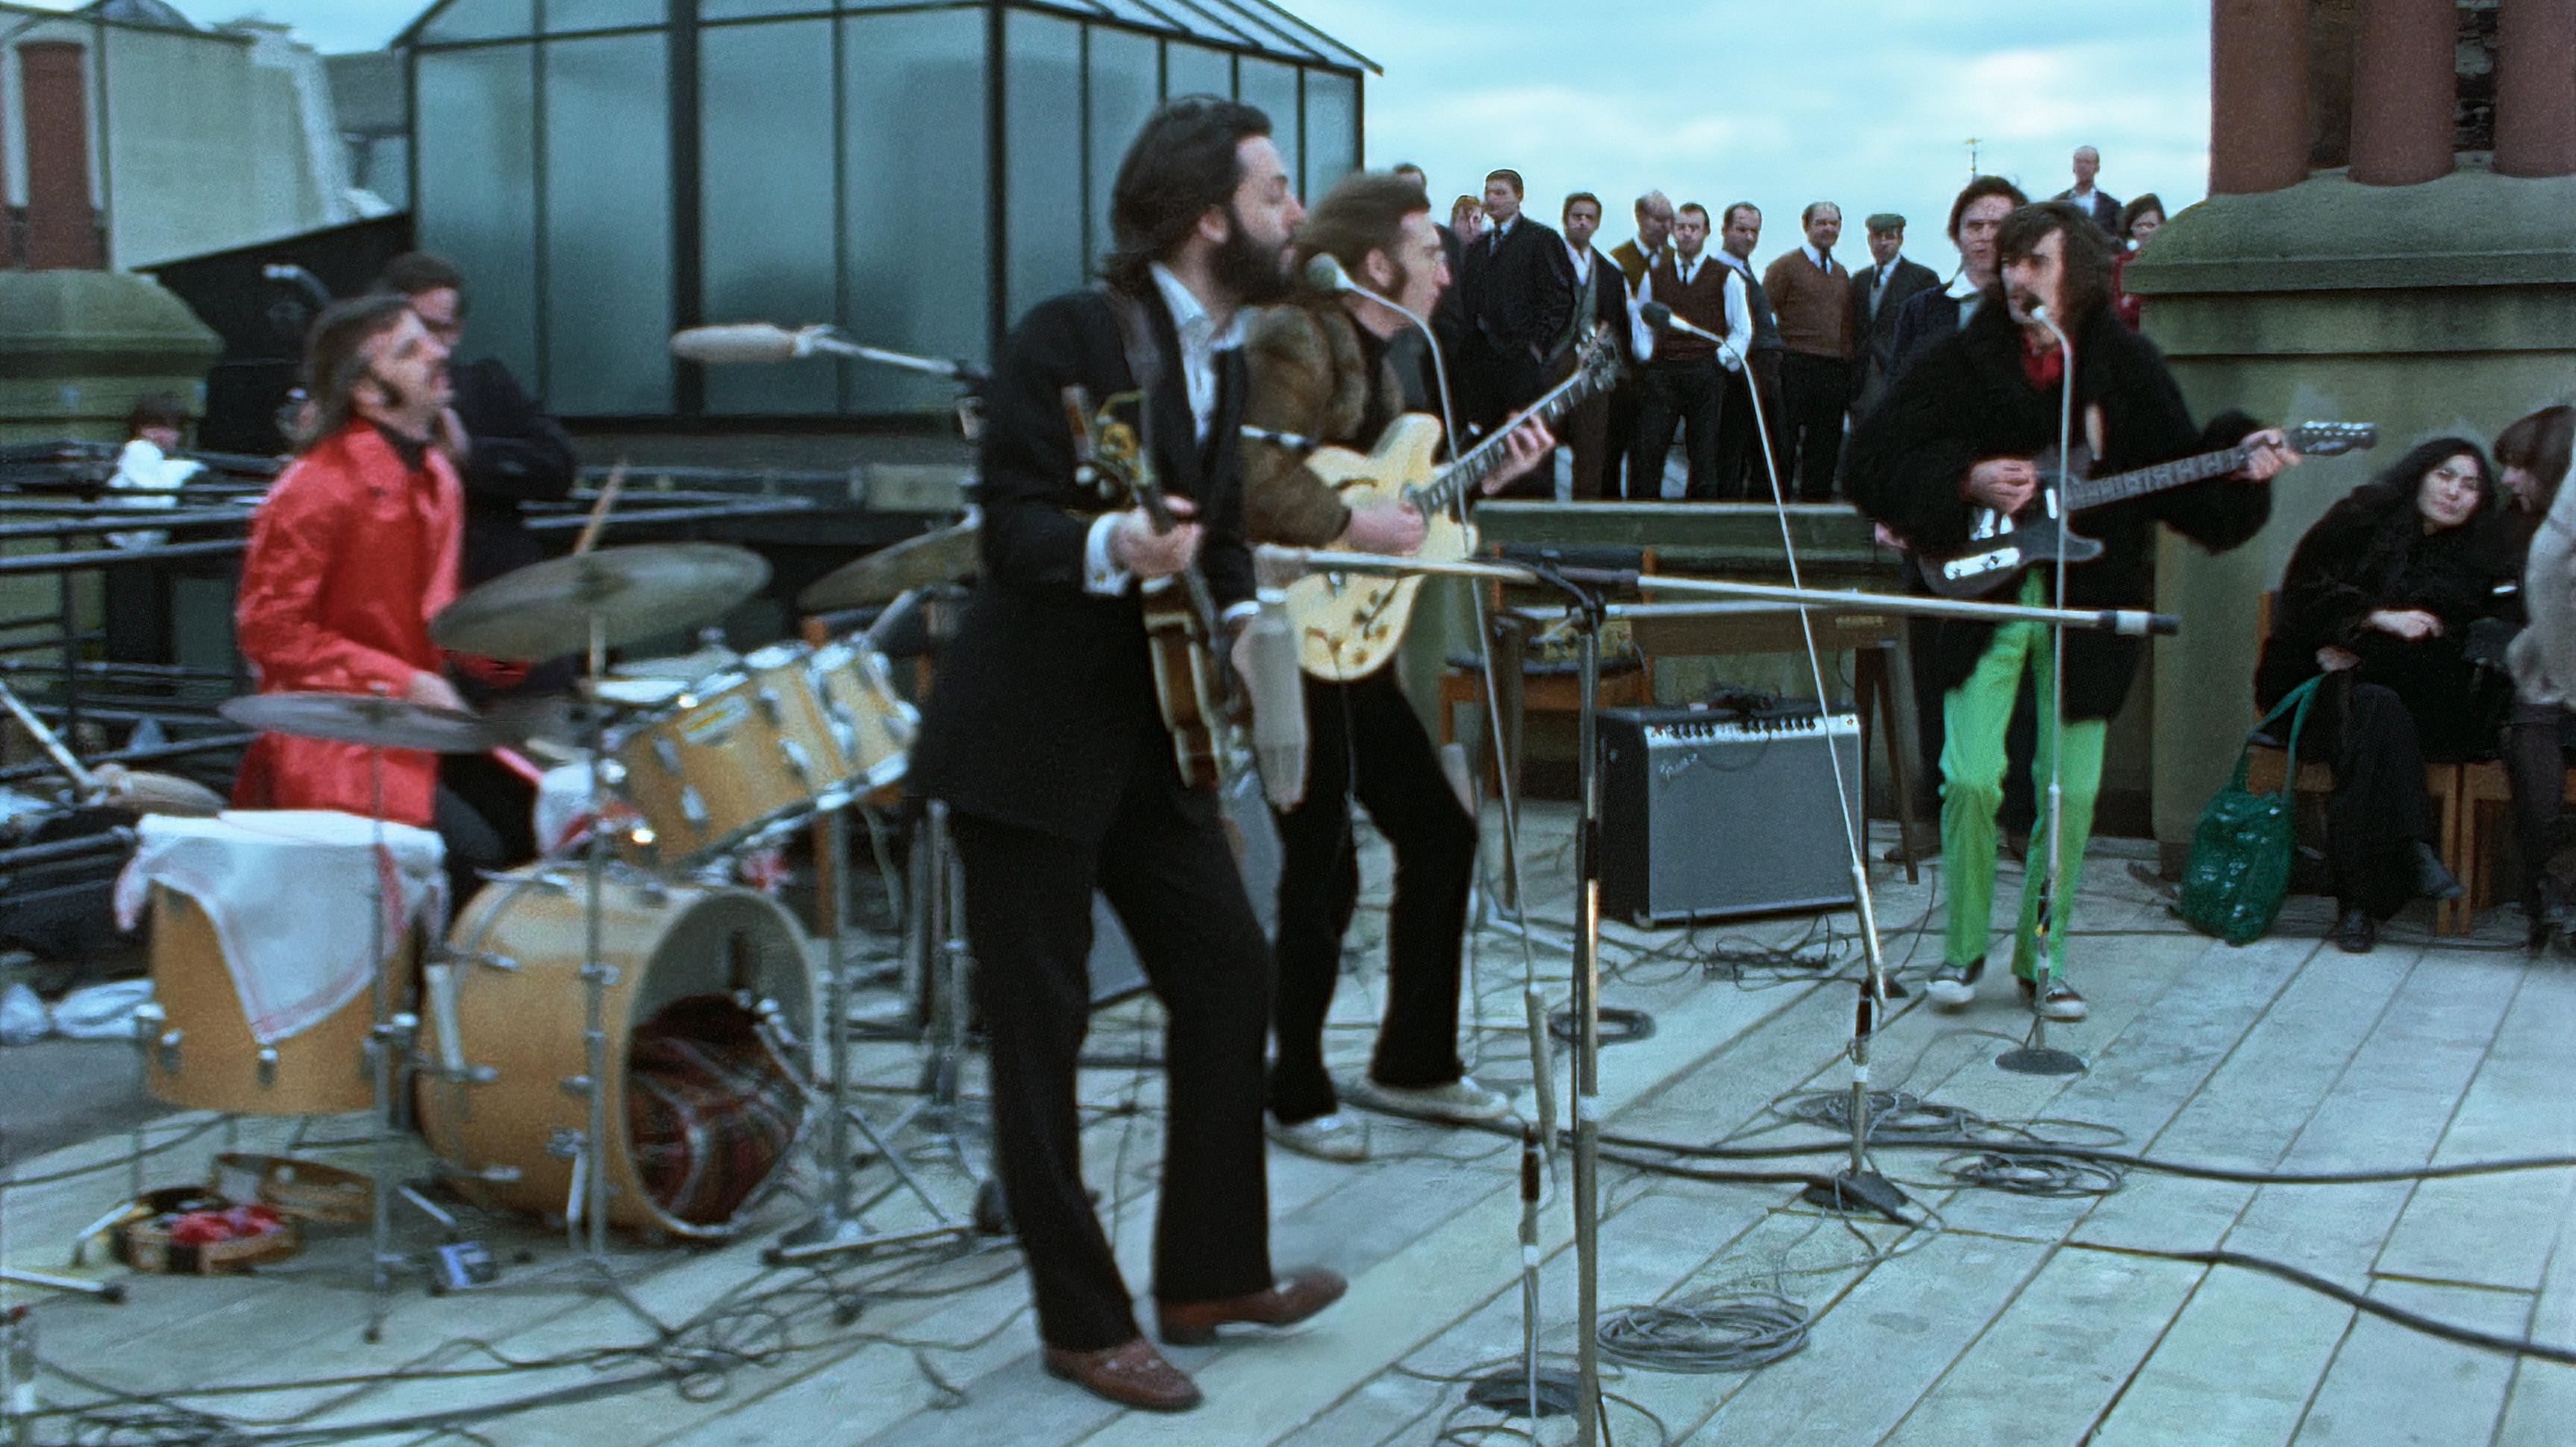 Unseen recordings of The Beatles emerge in the trailer for Peter Jackson’s The Beatles: Get Back